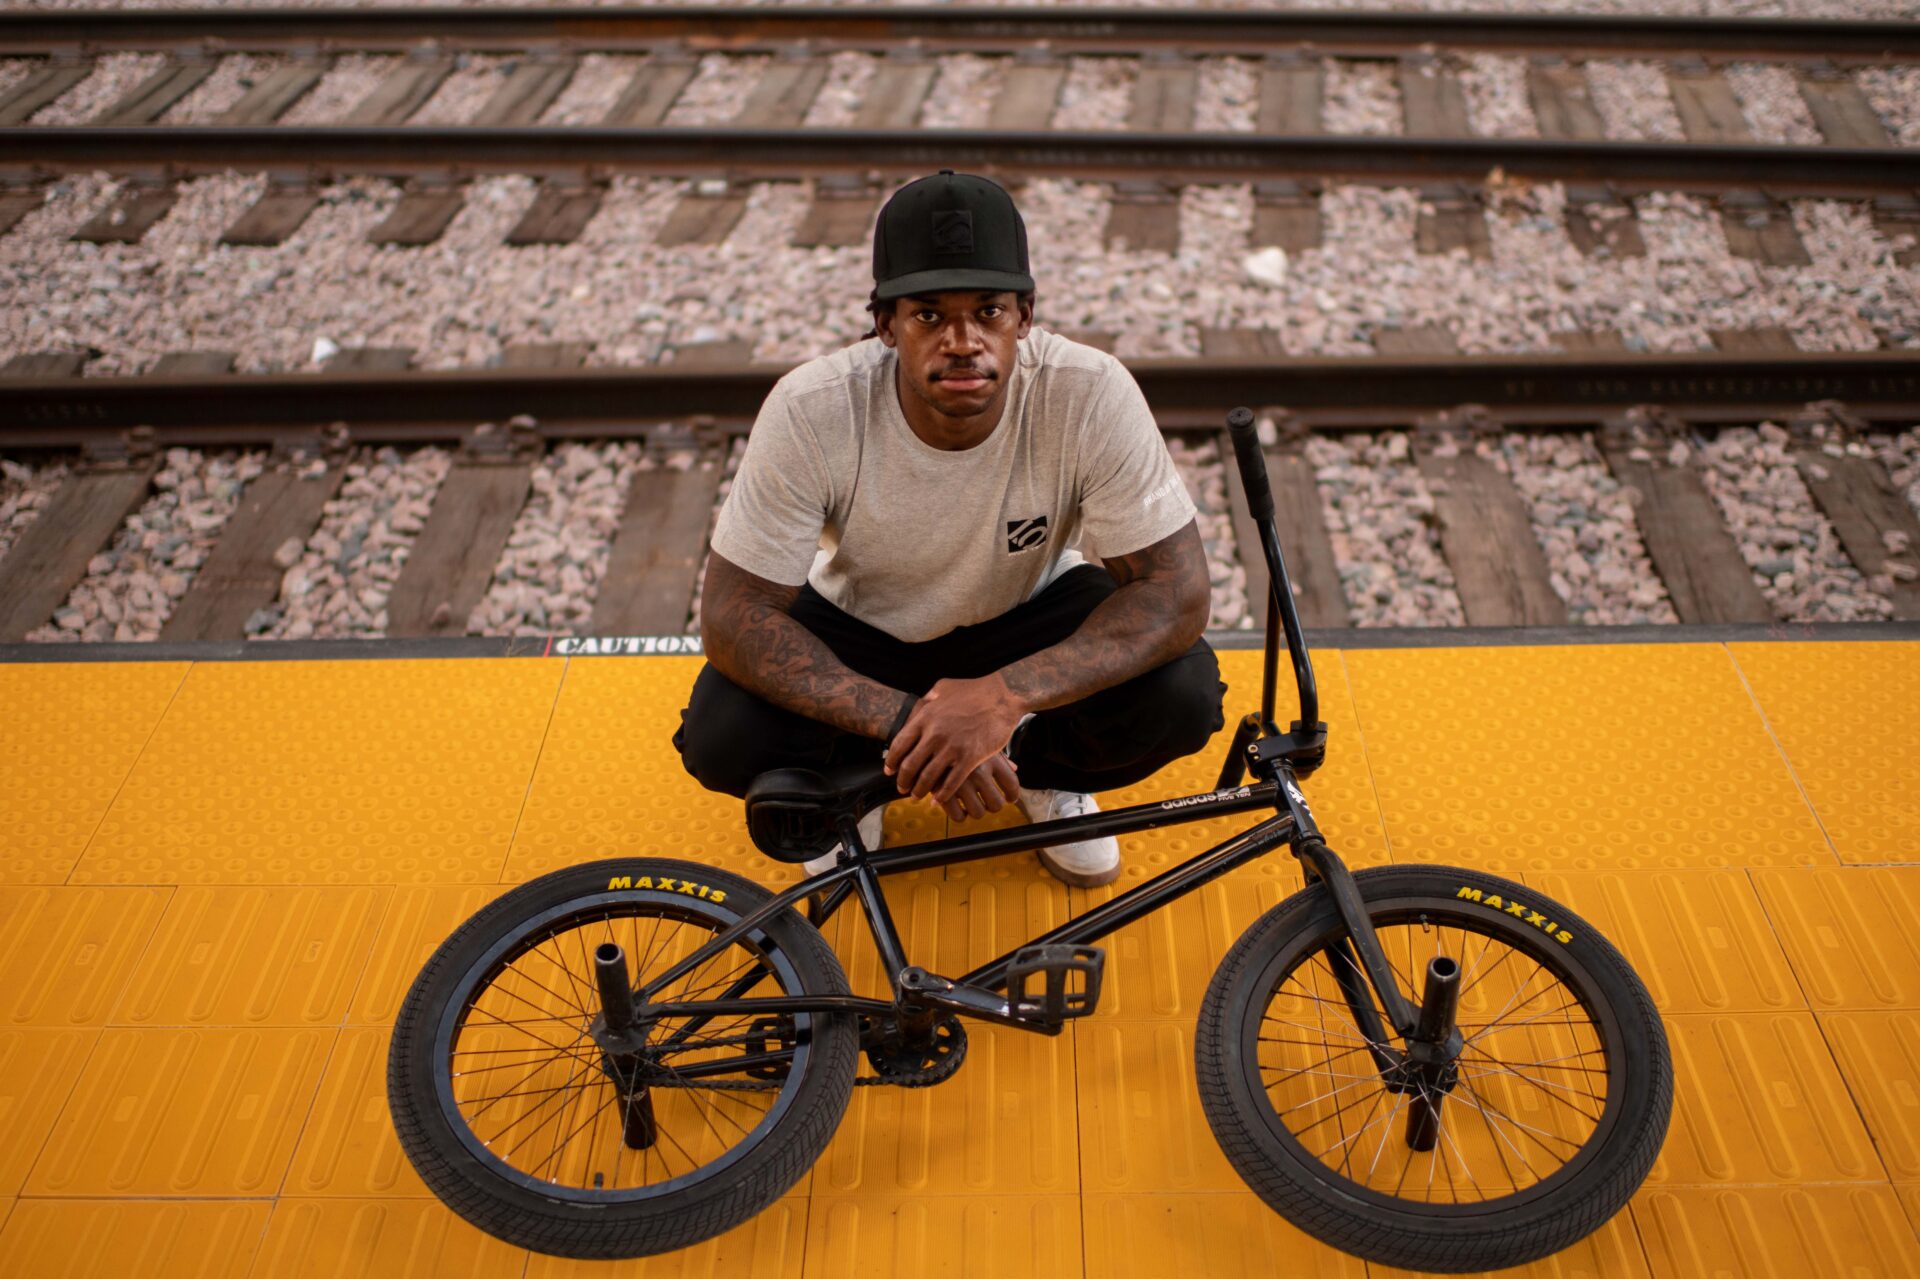 Simms with his BMX bike